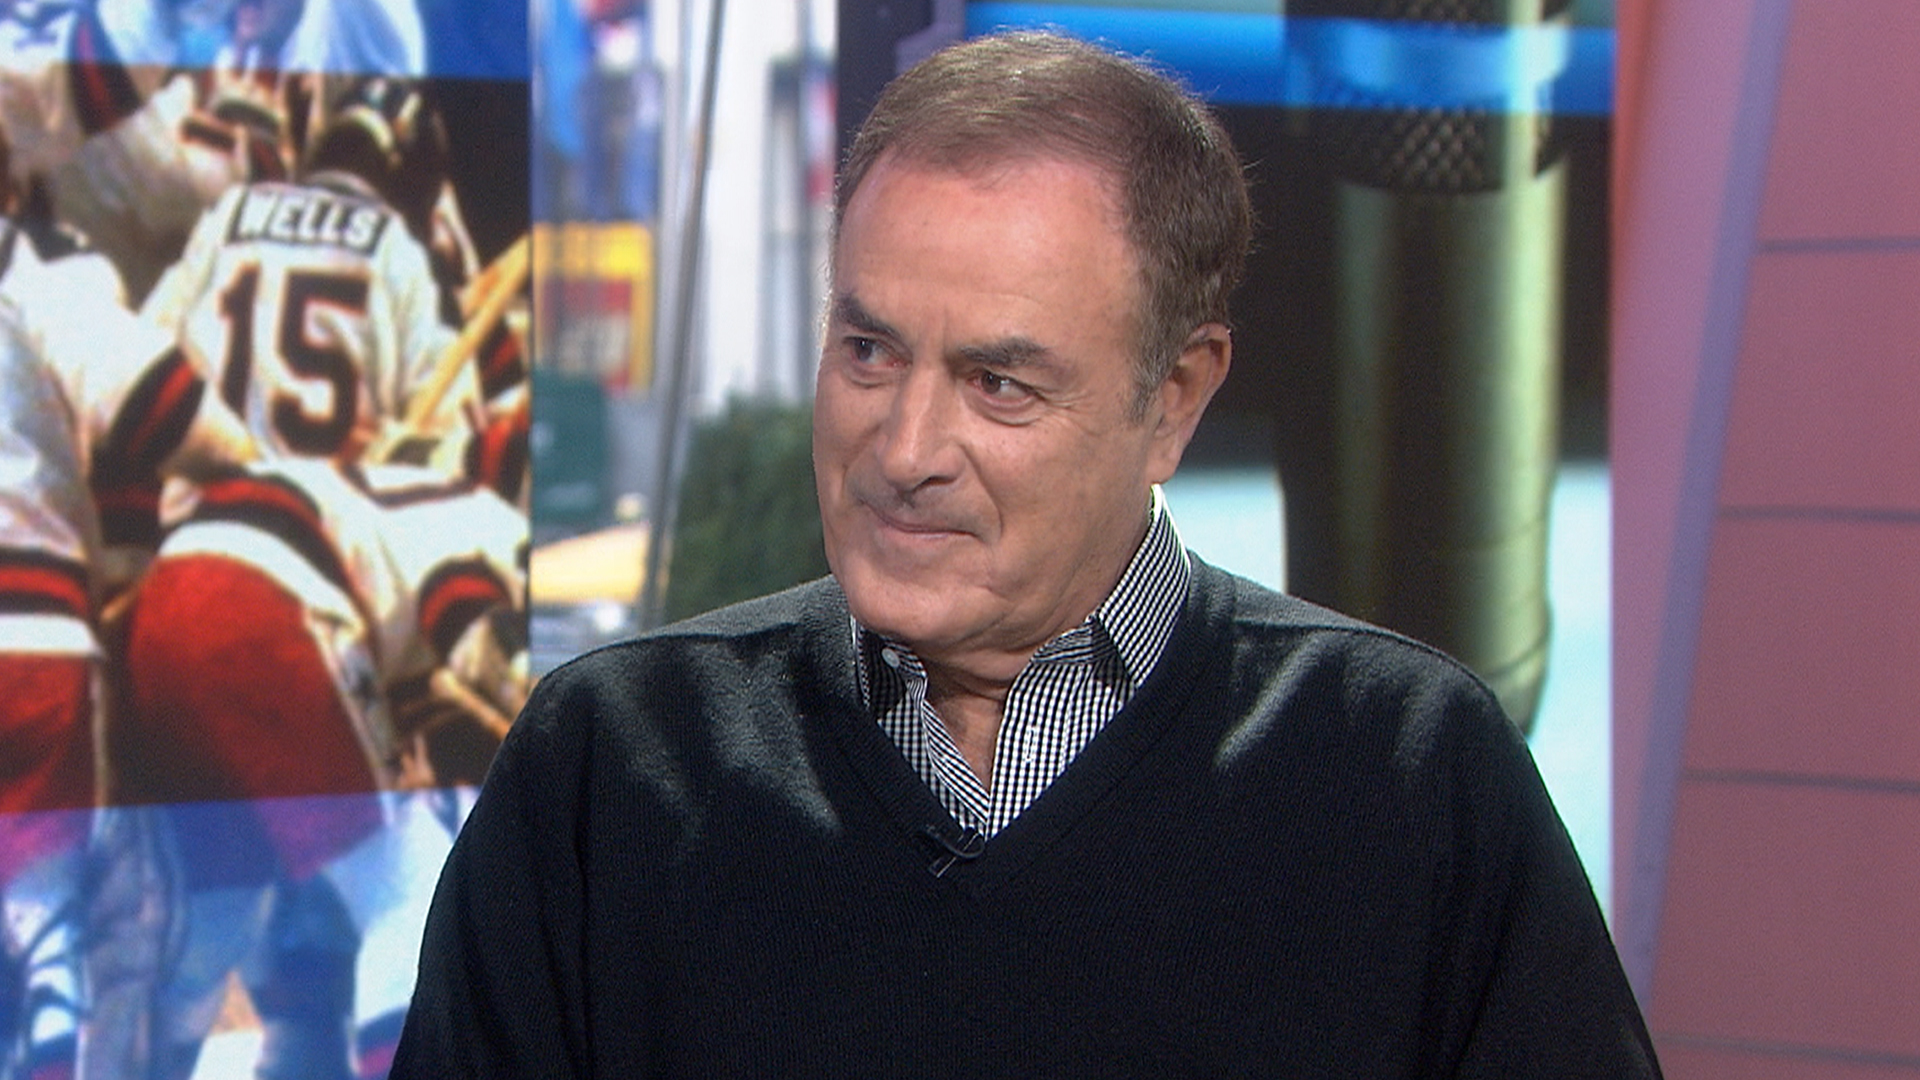 Al Michaels: I helped pick girls for ‘The Dating Game’ - TODAY.com1920 x 1080